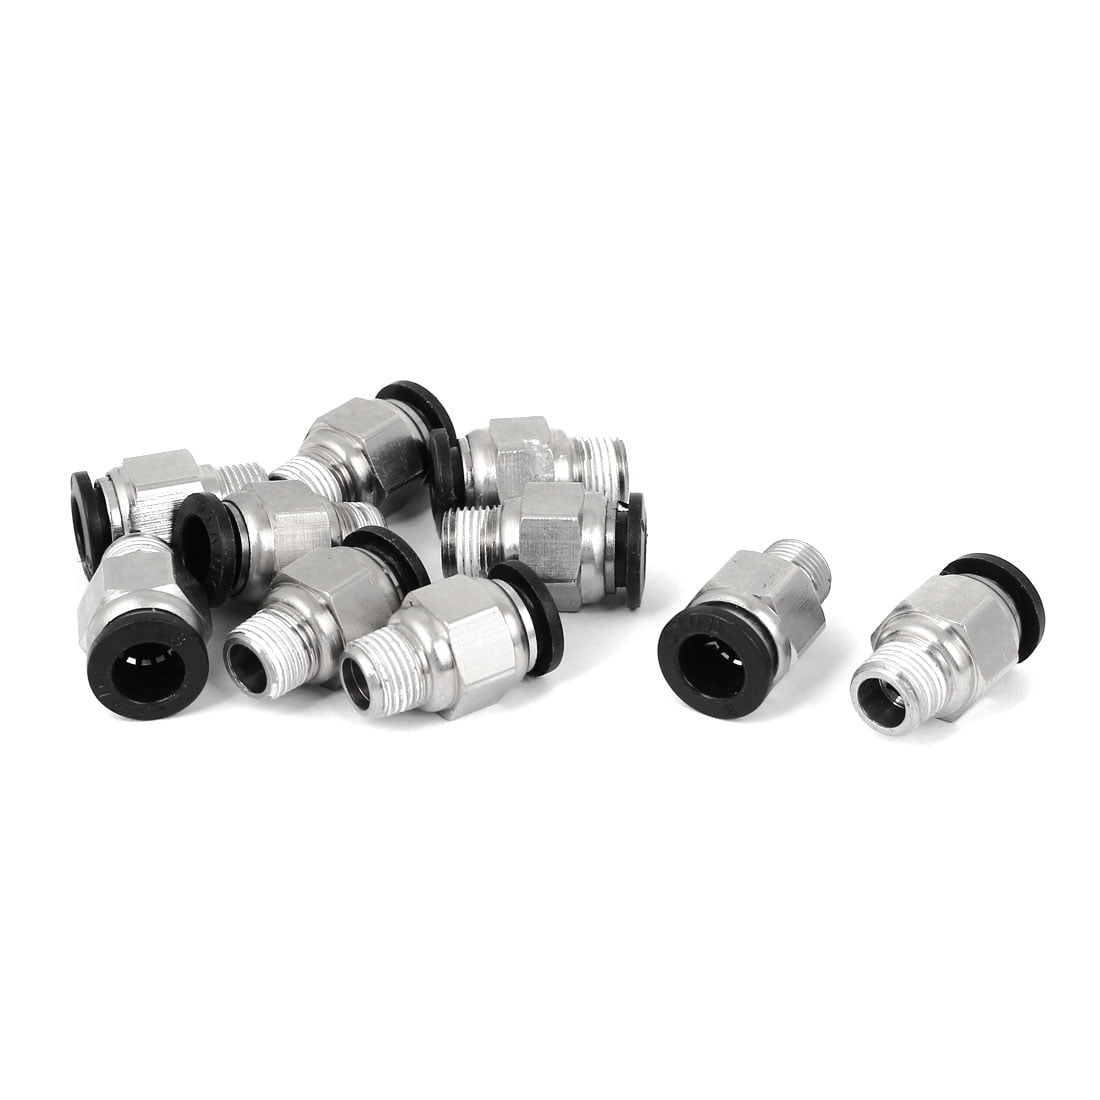 Details about   PC8-M12*1.5 Pneumatic tube Quick insert connector  10pc 